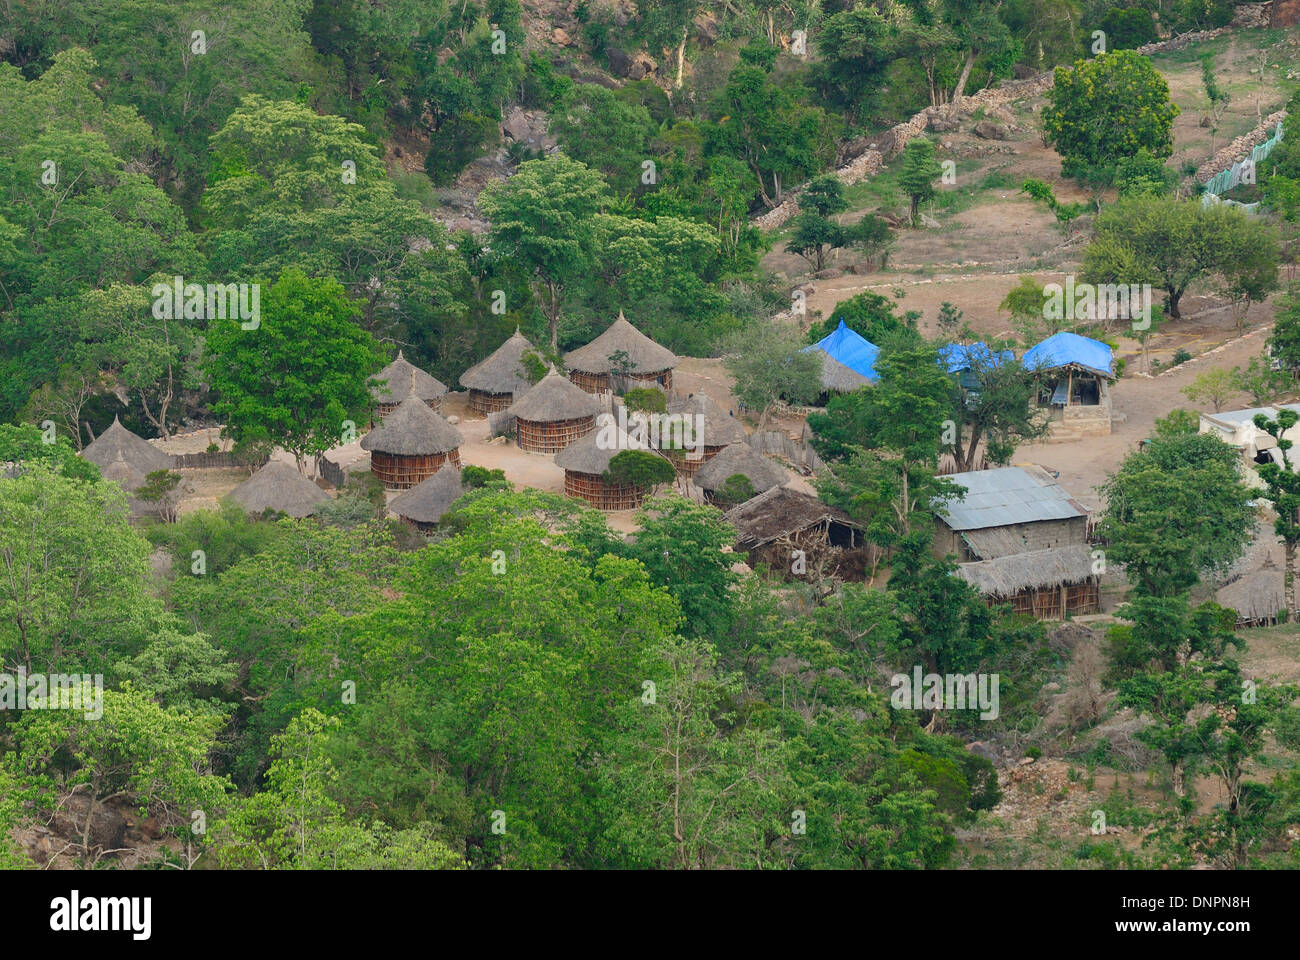 Village in the Day forest in Djibouti, Horn of Africa Stock Photo